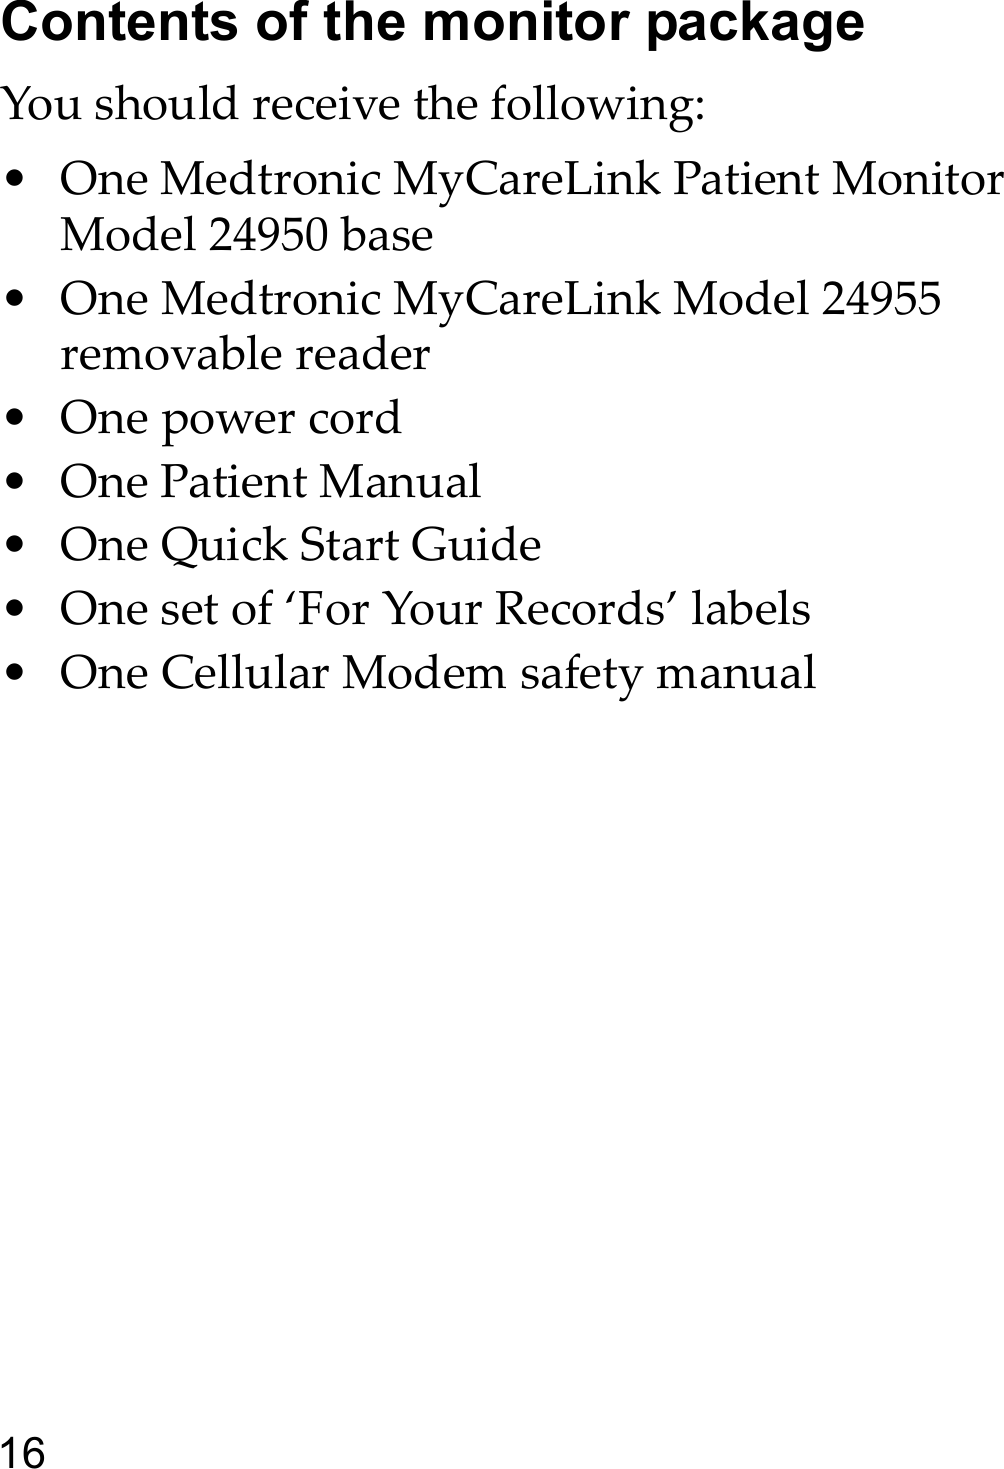 16Contents of the monitor packageYou should receive the following:• One Medtronic MyCareLink Patient Monitor Model 24950 base• One Medtronic MyCareLink Model 24955 removable reader•One power cord• One Patient Manual•One Quick Start Guide• One set of ‘For Your Records’ labels• One Cellular Modem safety manual